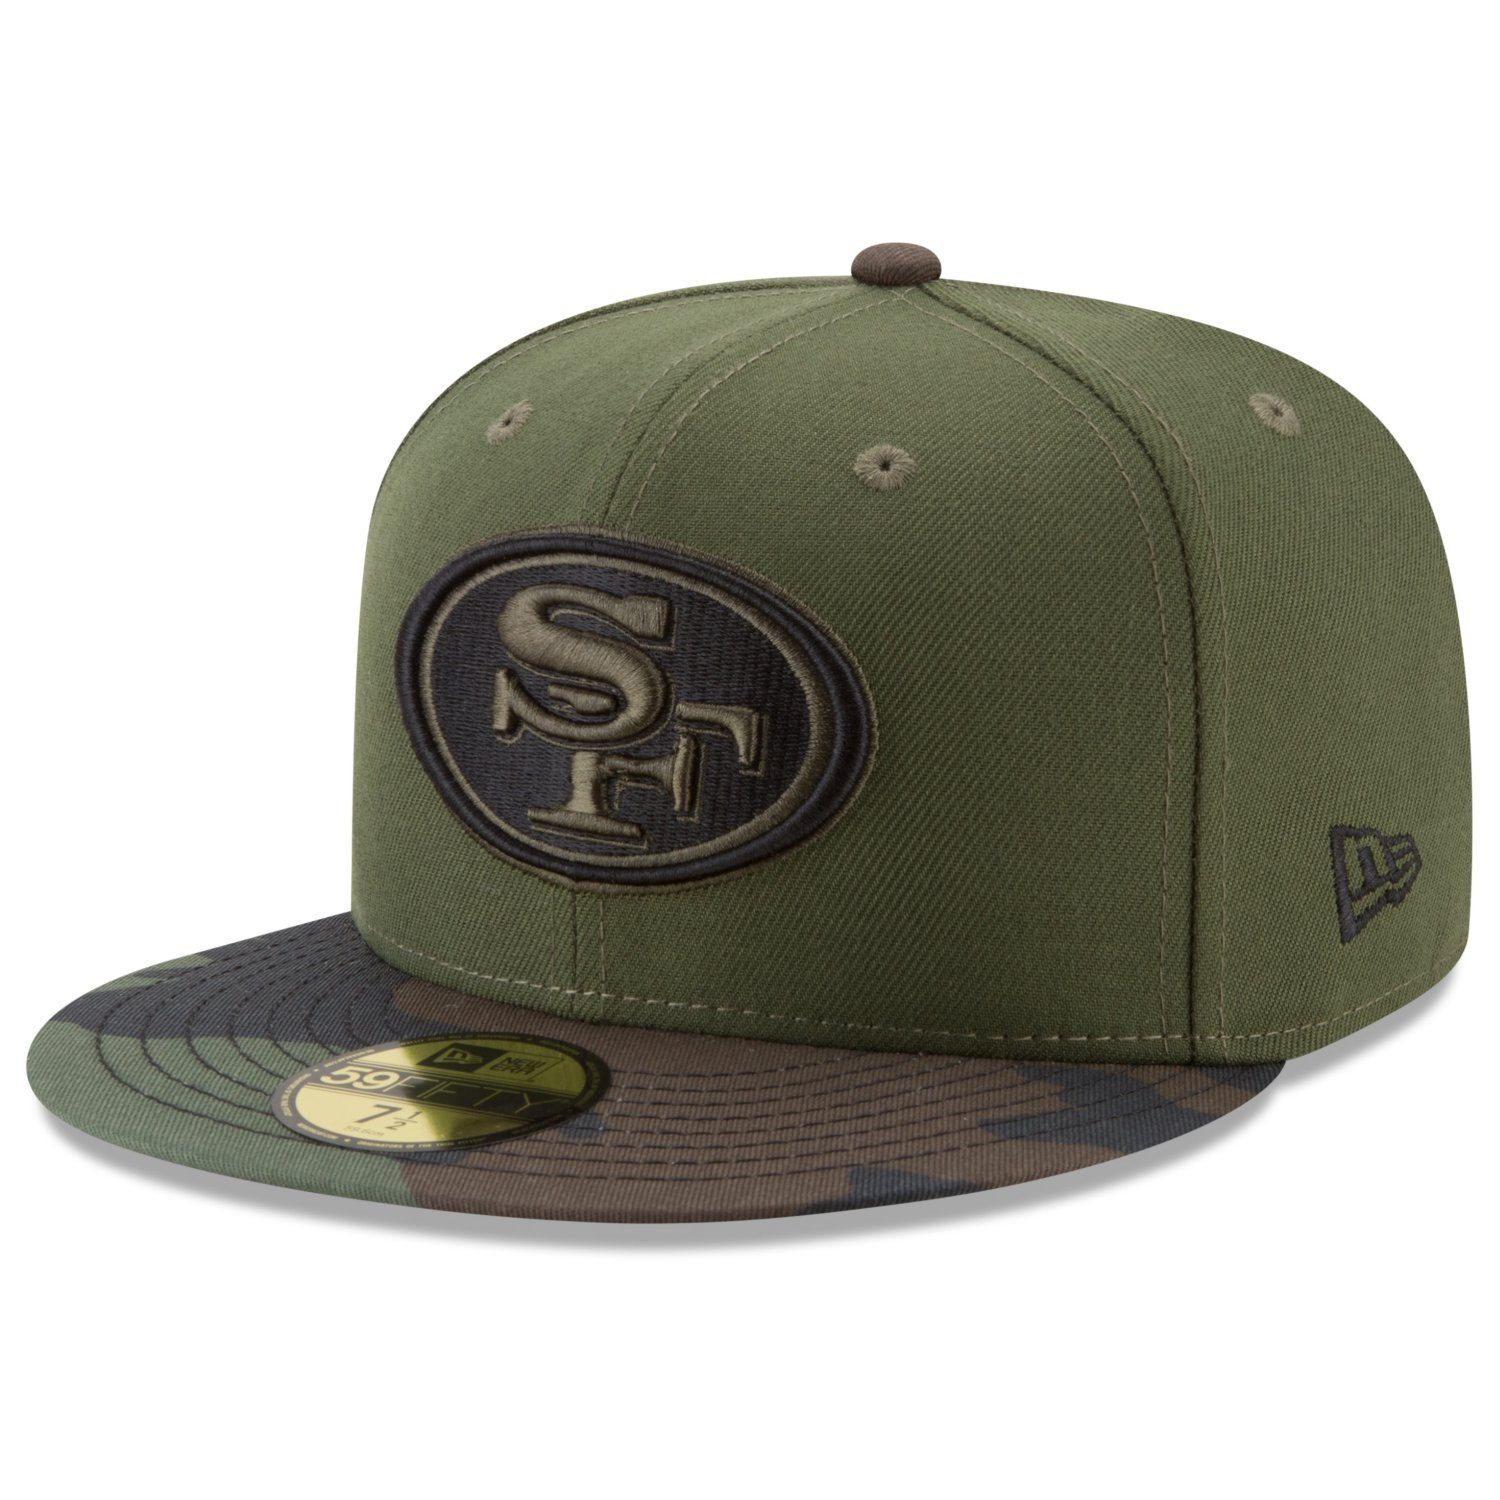 Fitted 49ers 59Fifty Era New Cap San Francisco